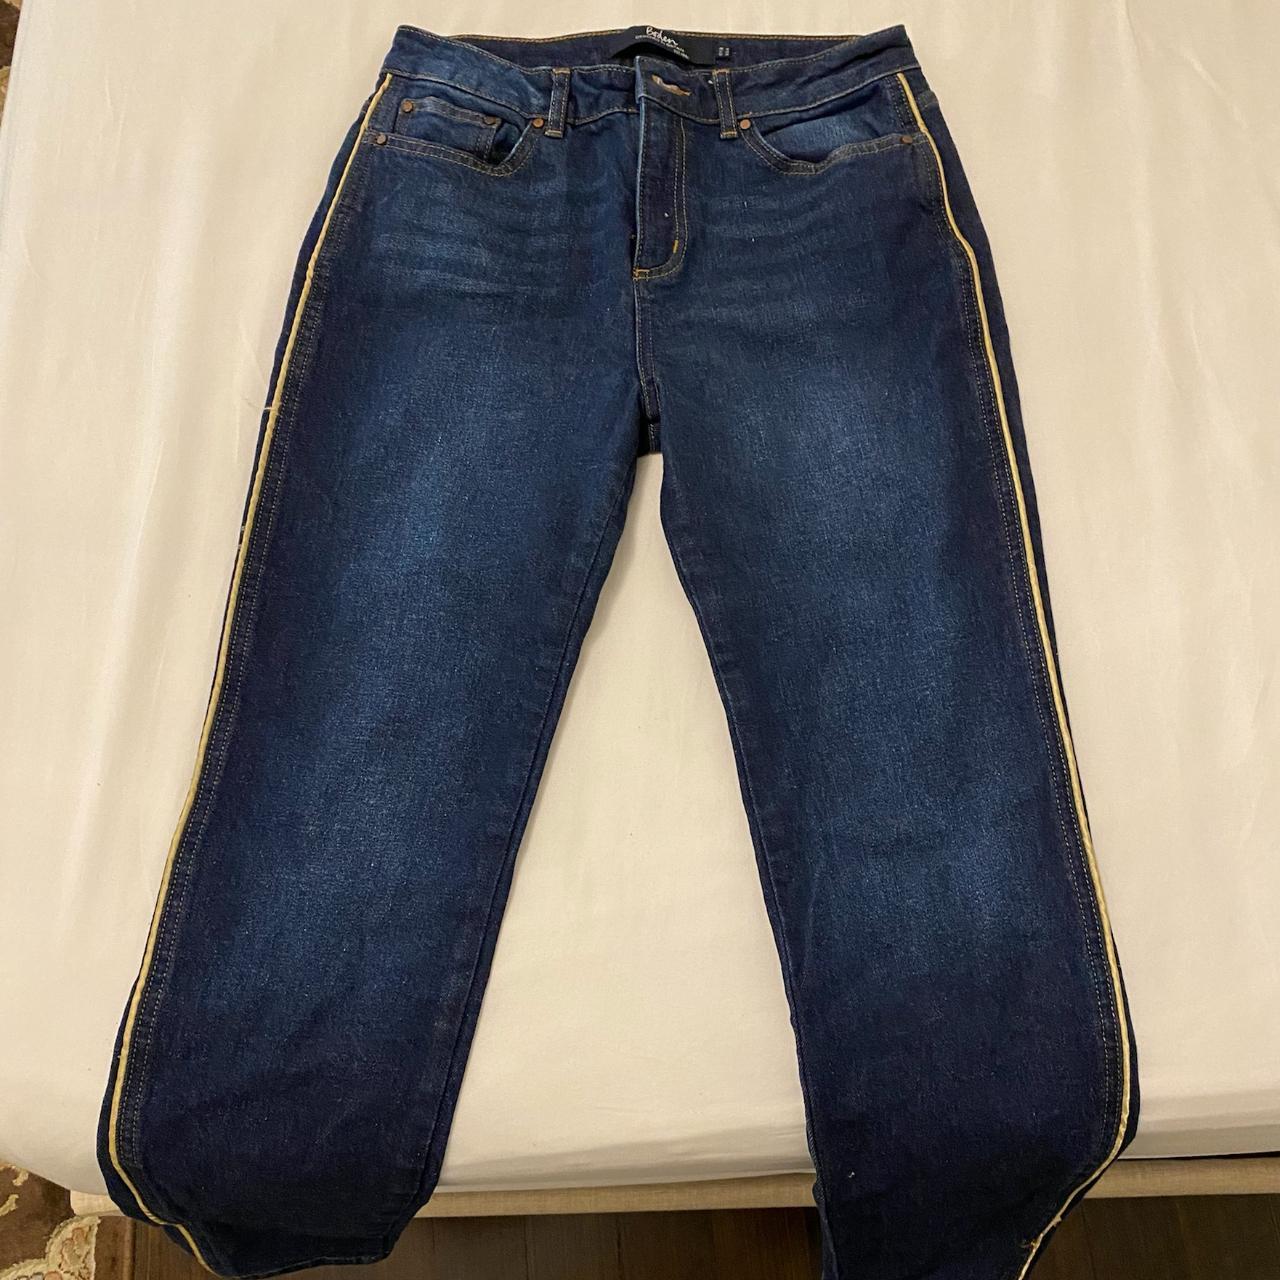 Boden Women's Blue and Yellow Jeans | Depop